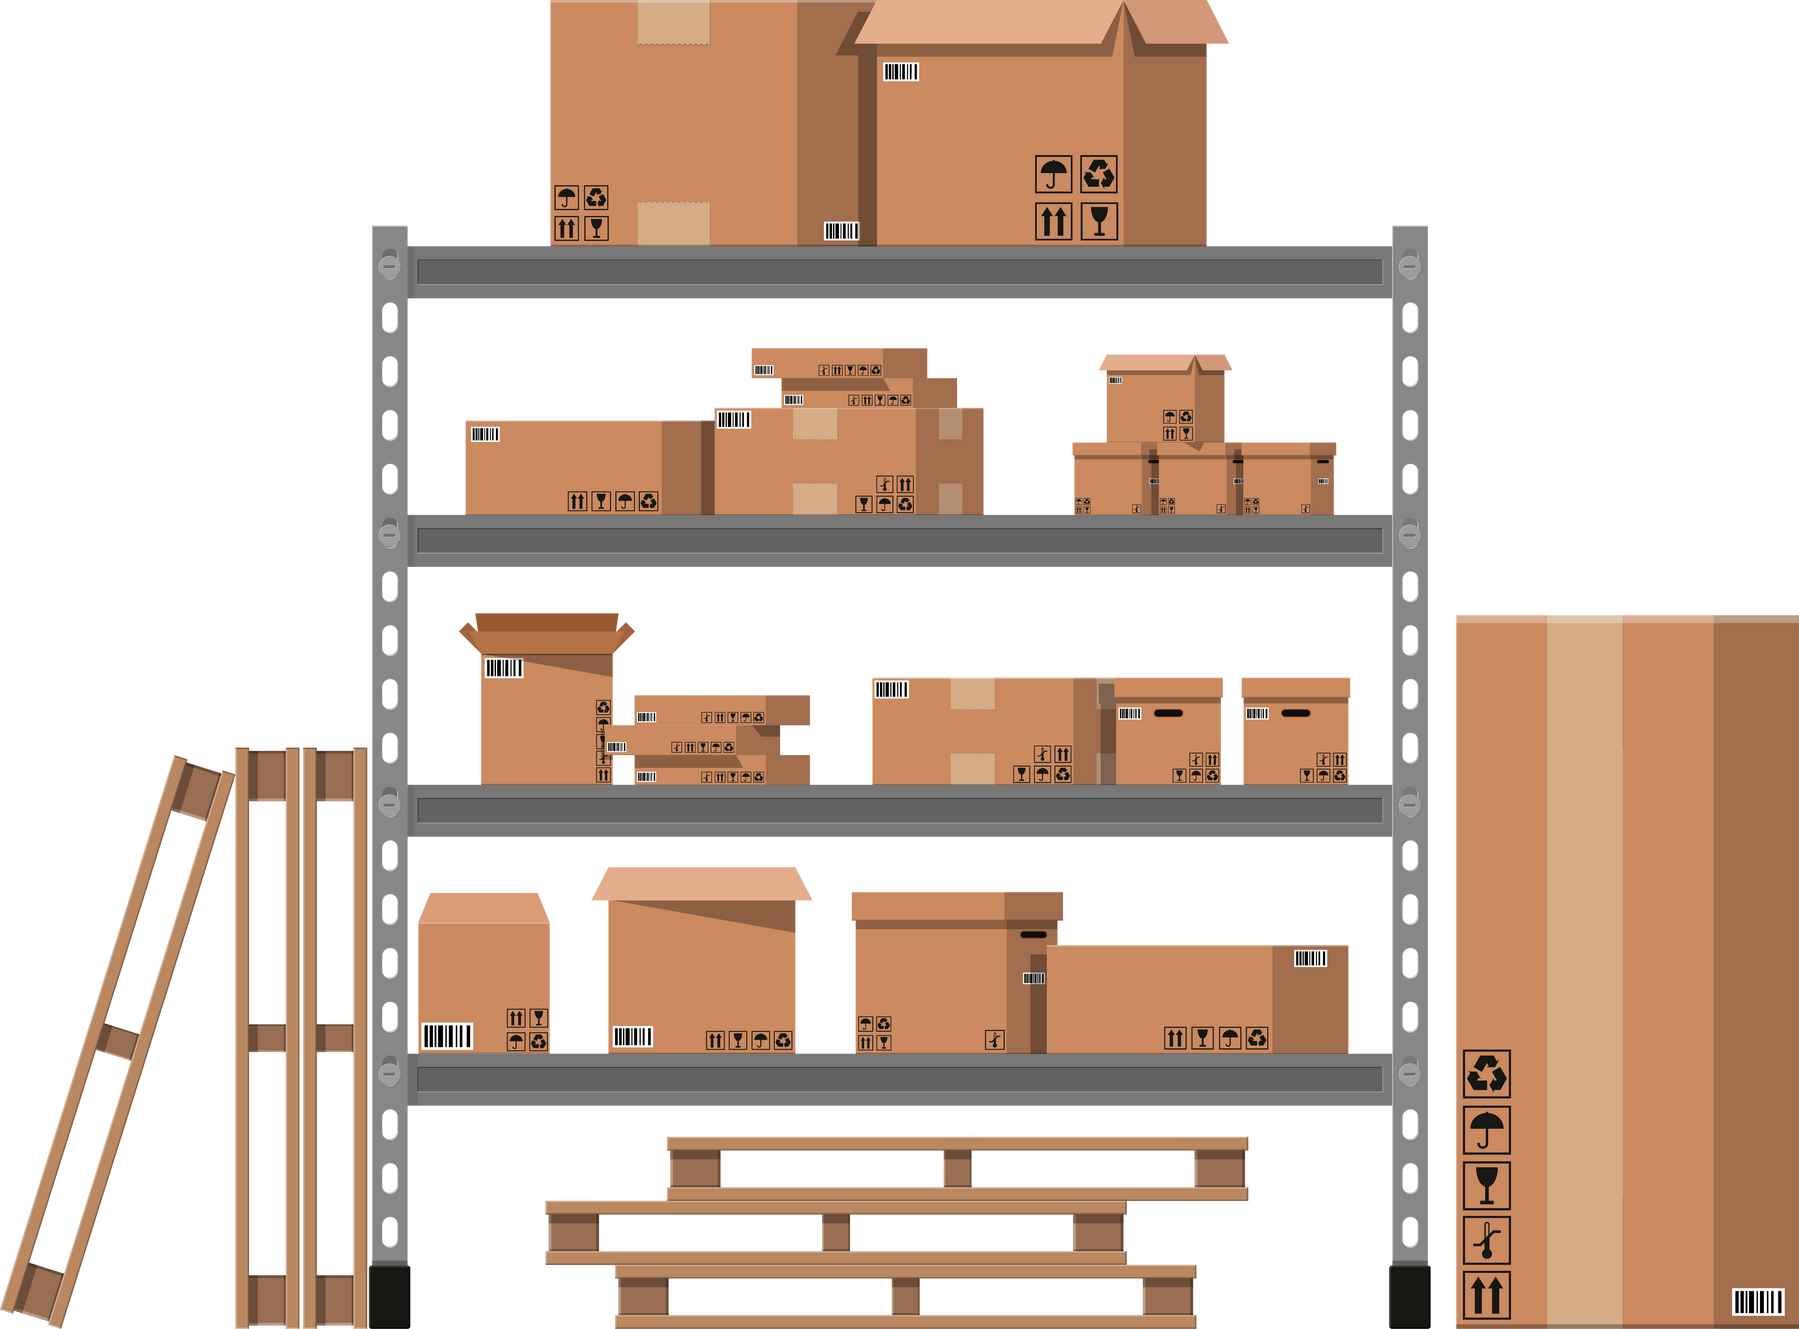 Pile Cardboard Boxes on Warhouse Shelves